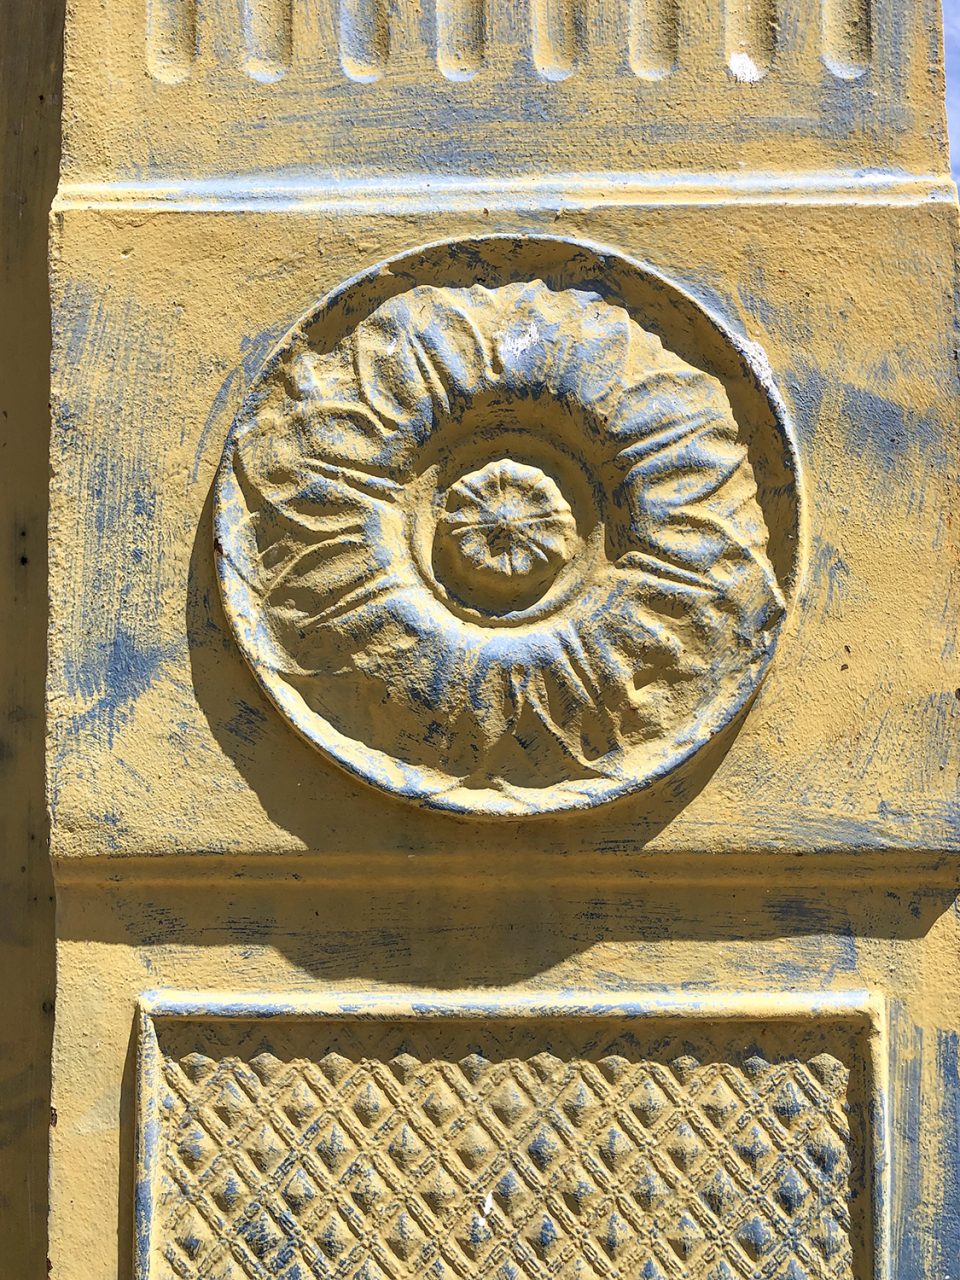 A decorative rosette and diamond motif on the Chattanooga Roofing and Foundry Co. in Yazoo City, Mississippi.